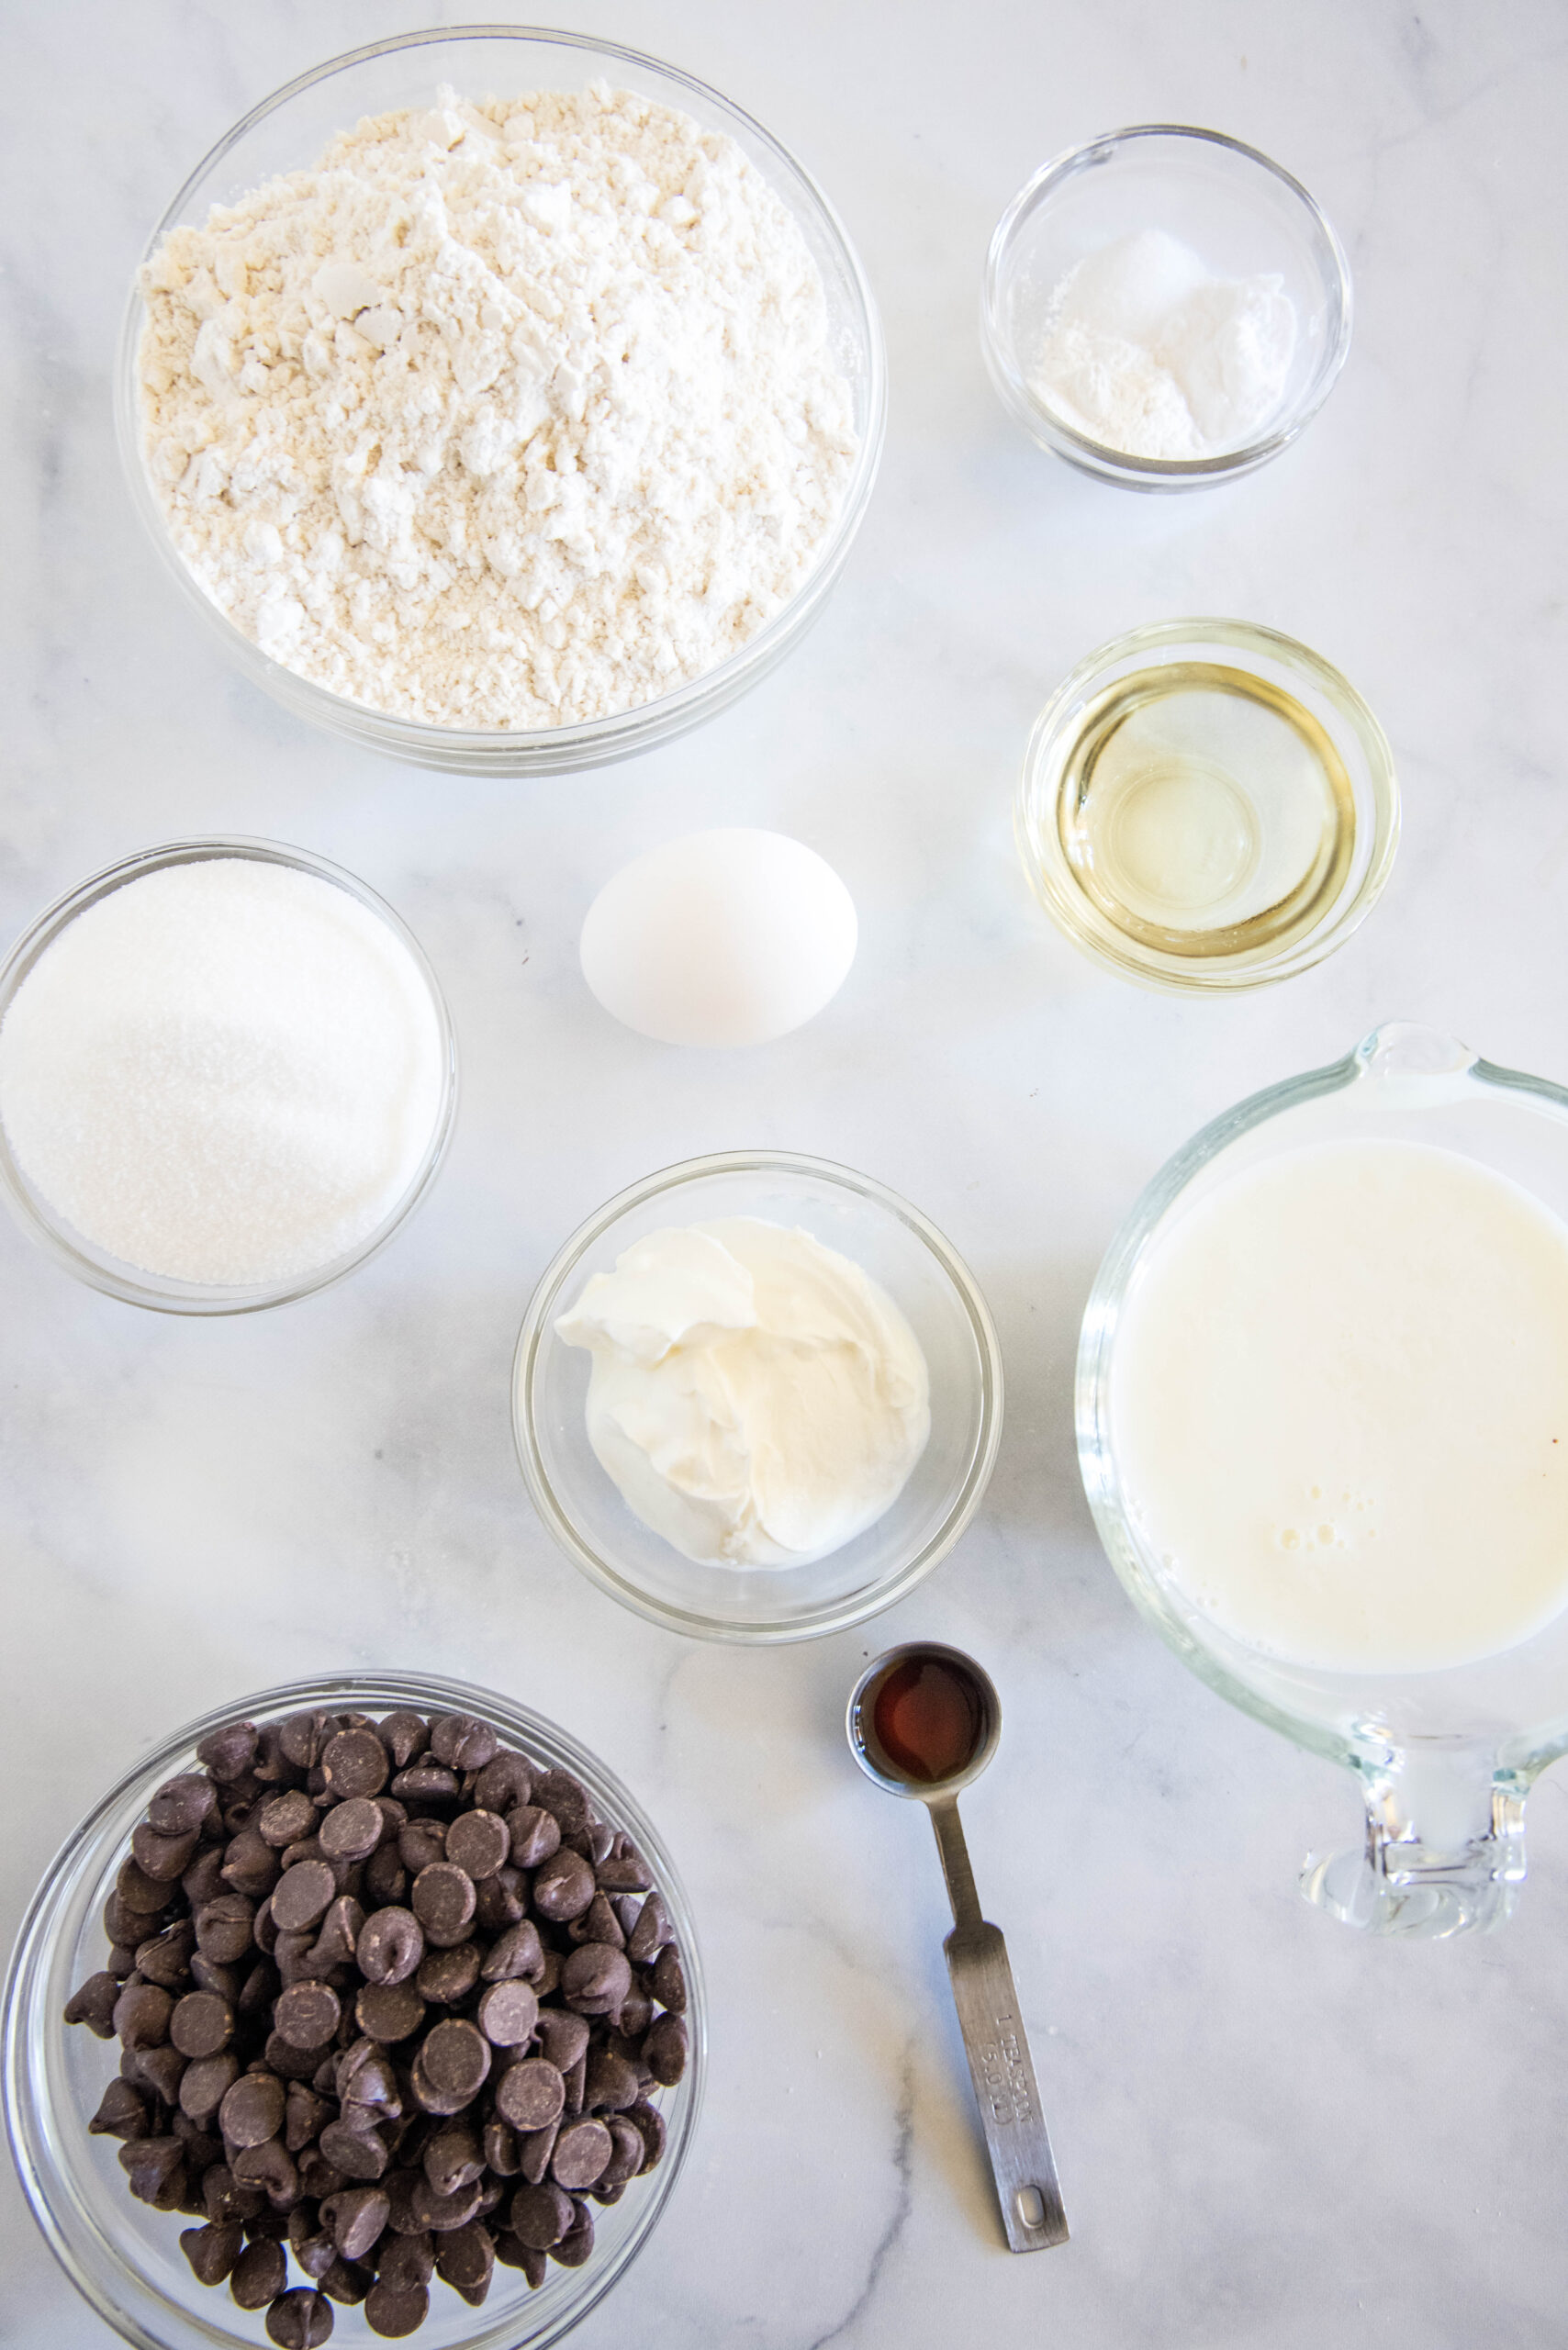 Ingredients for buttermilk muffins with chocolate chips.